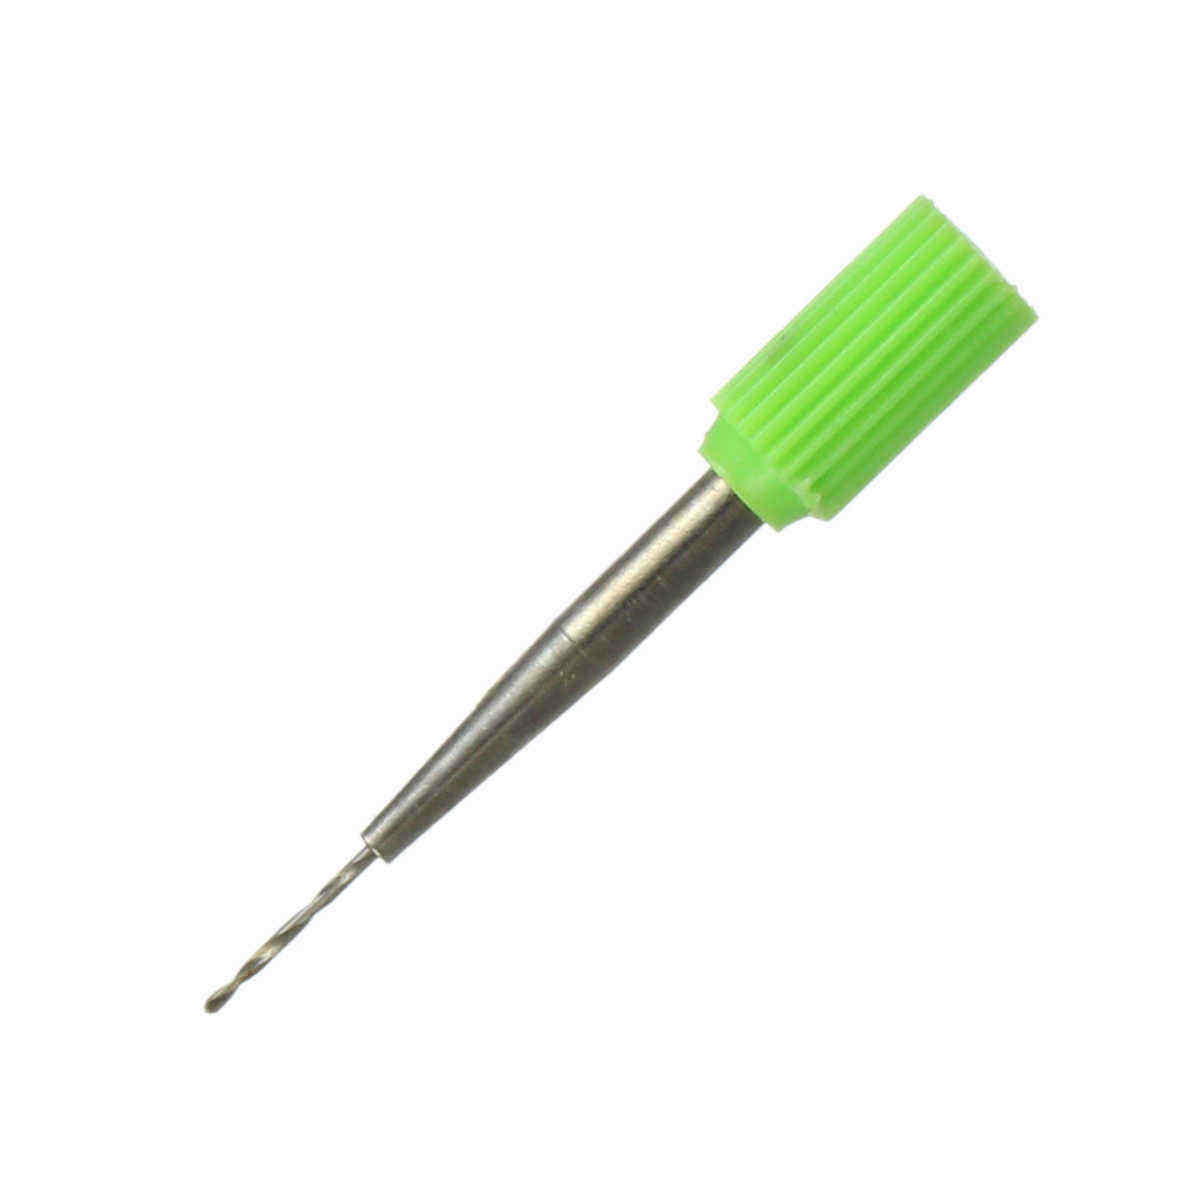 06-Dental-Dentist-Link-Pins-Conical-Screw-Drills-Kit-Refills-Plated-Tapered-Tool-1112839